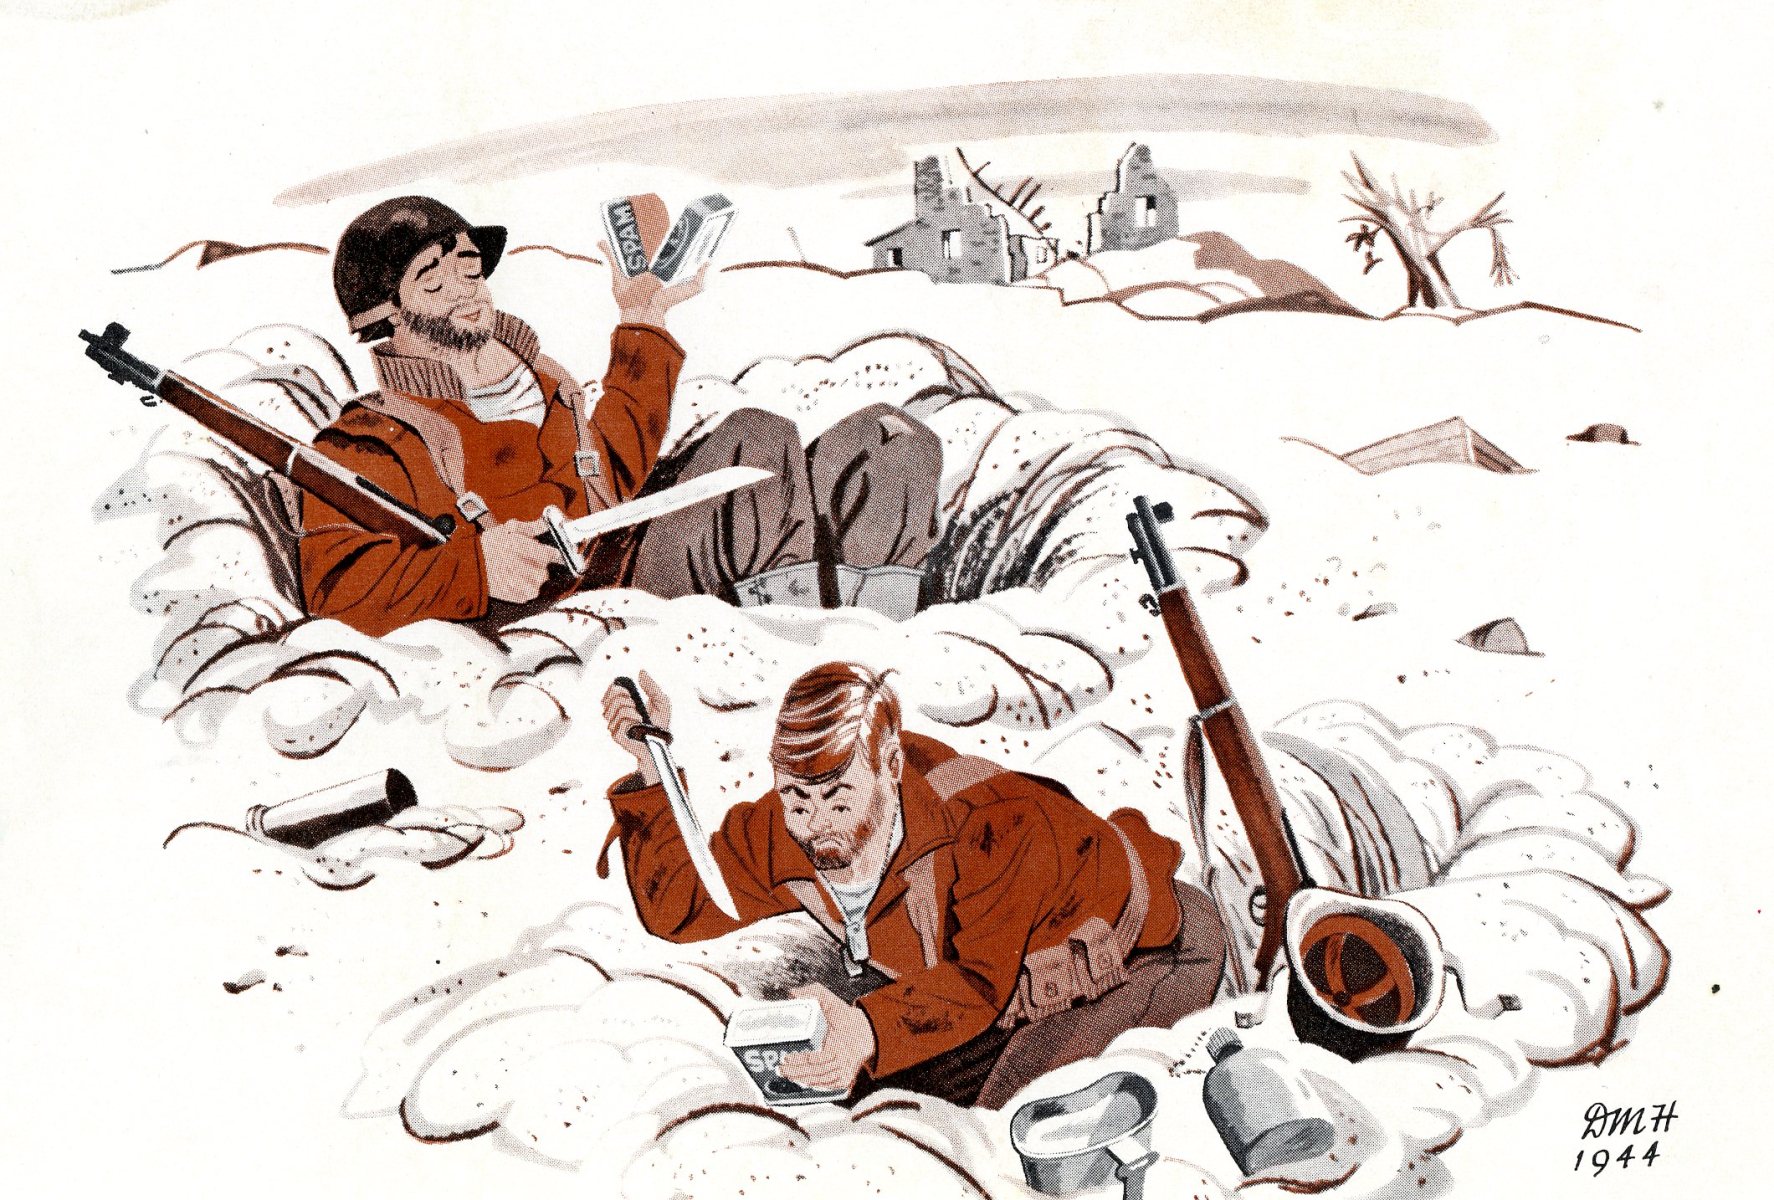 "Willie and Joe were stock characters representing United States infantry soldiers during World War II. They were created and drawn by American cartoonist Bill Mauldin, who was also a soldier, from 1940 to 1948, with additional drawings later. They were published in a cartoon format, first in the 45th Division News, then <em>Stars and Stripes</em>, and starting in 1944, a syndicated newspaper cartoon distributed by United Feature Syndicate. Willie and Joe were used for recruitment purposes as well."